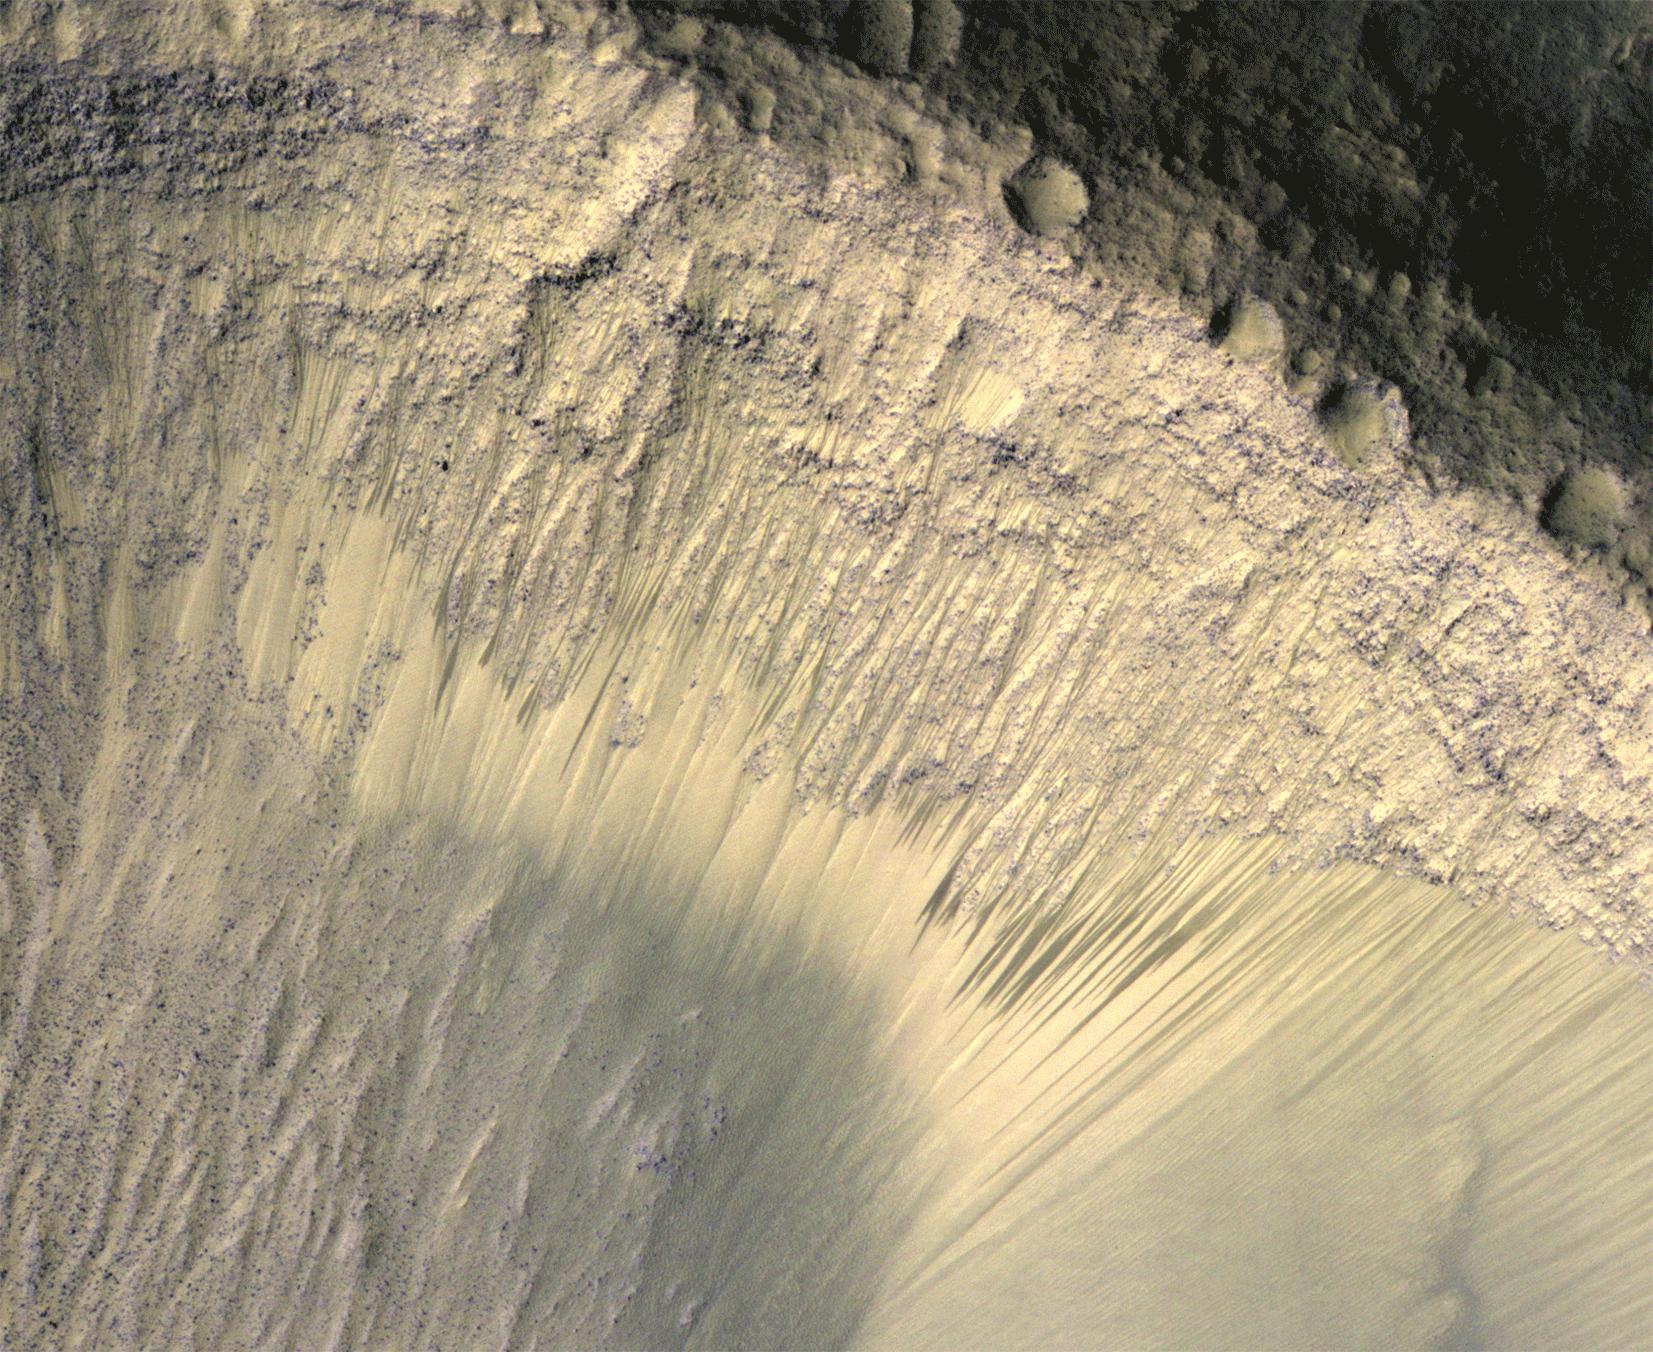 Images from the High Resolution Imaging Science Experiment (HiRISE) camera on NASA's Mars Reconnaissance Orbiter show how the appearance of dark markings, possibly liquid water, on Martian slope changes with the seasons. Photo Credit: NASA/JPL-Caltech/Univ. of Arizona